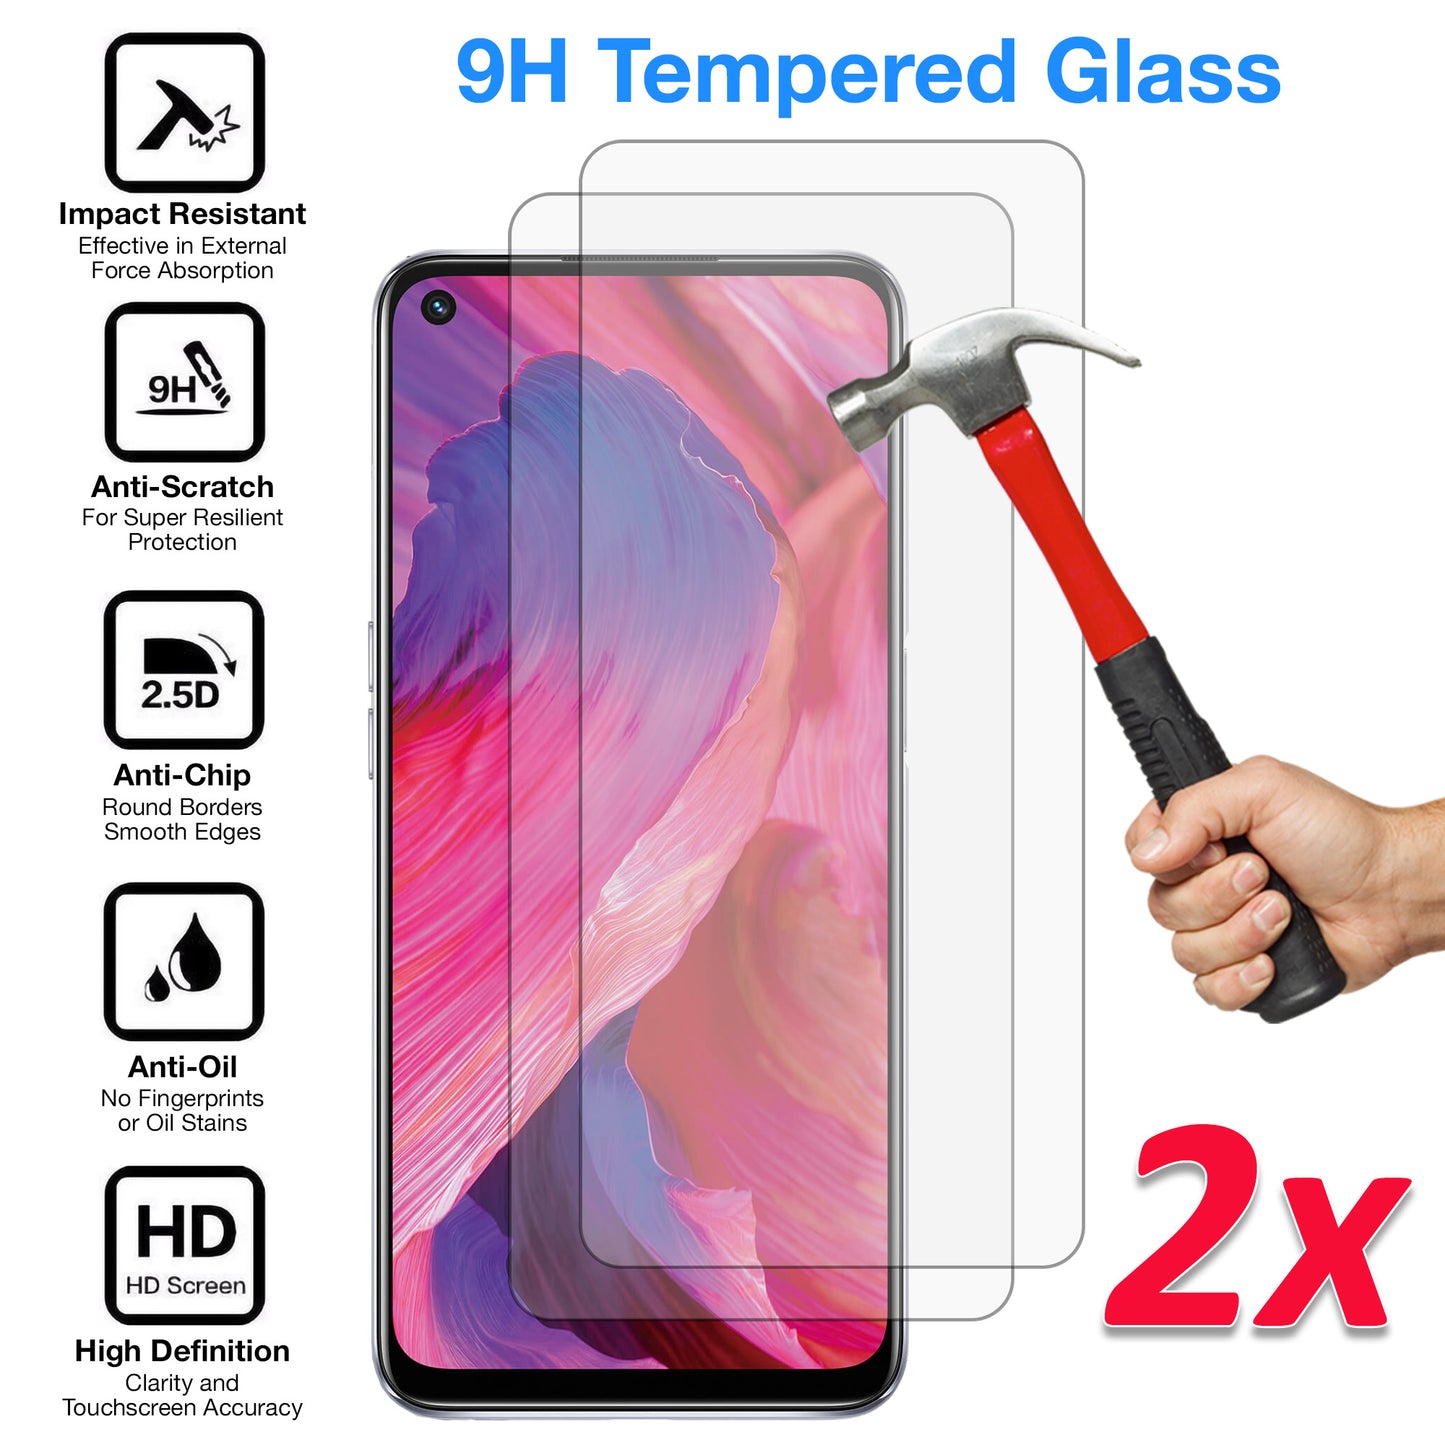 [2 Pack] MEZON OPPO A74 5G Tempered Glass 9H HD Crystal Clear Premium Case Friendly Screen Protector (OPPO A74 5G, 9H)